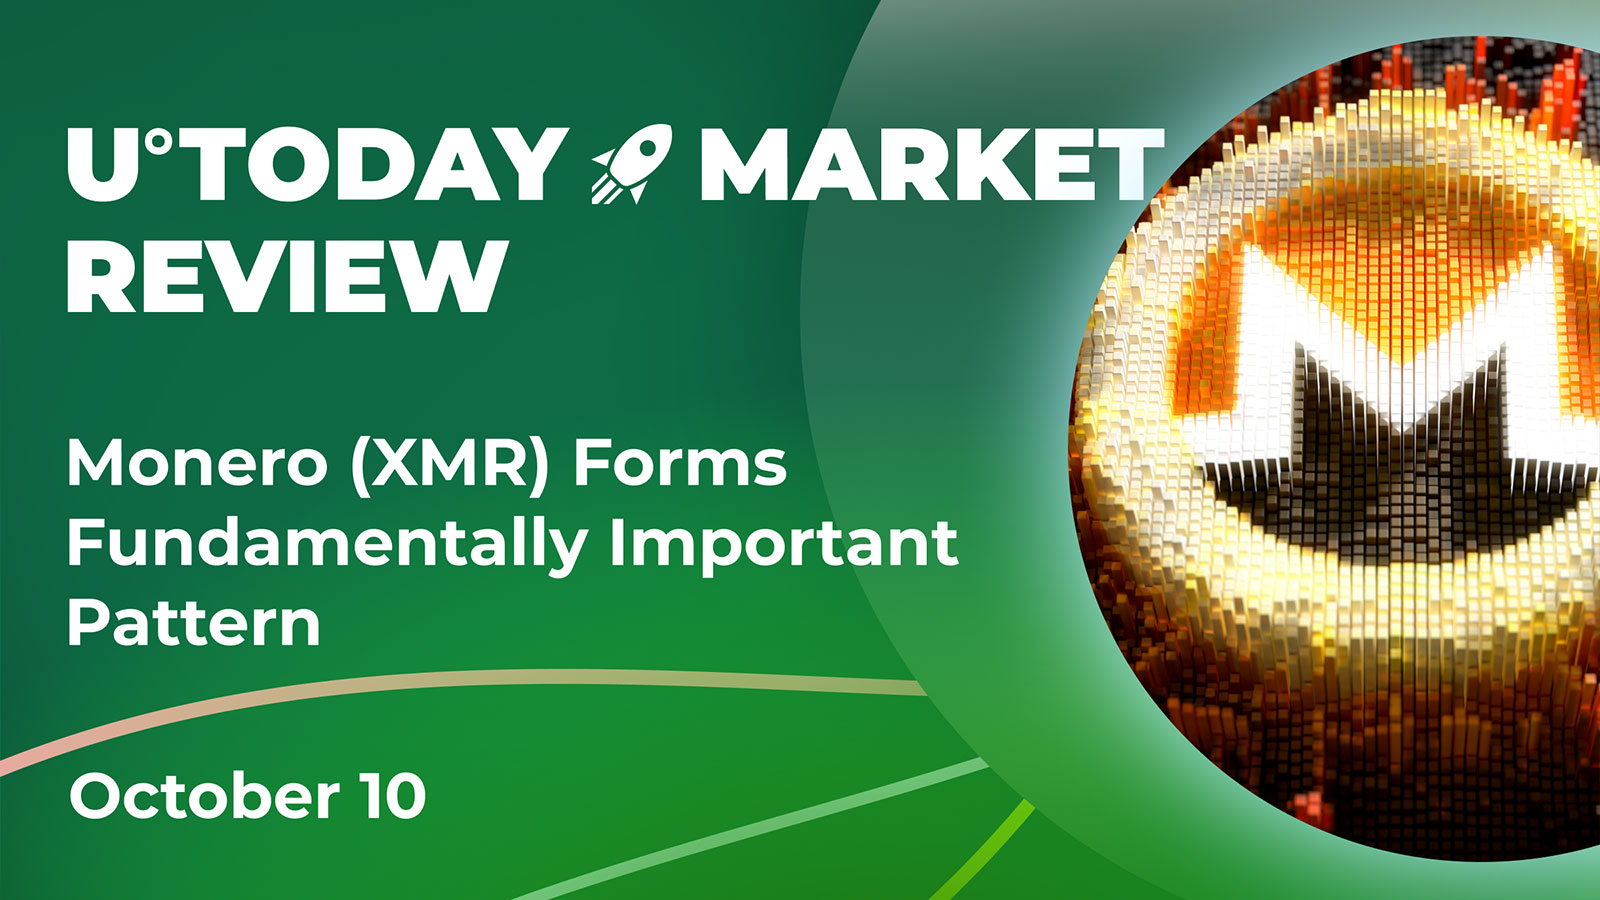 Monero (XMR) Forms Fundamentally Important Pattern: Crypto Market Review, October 10